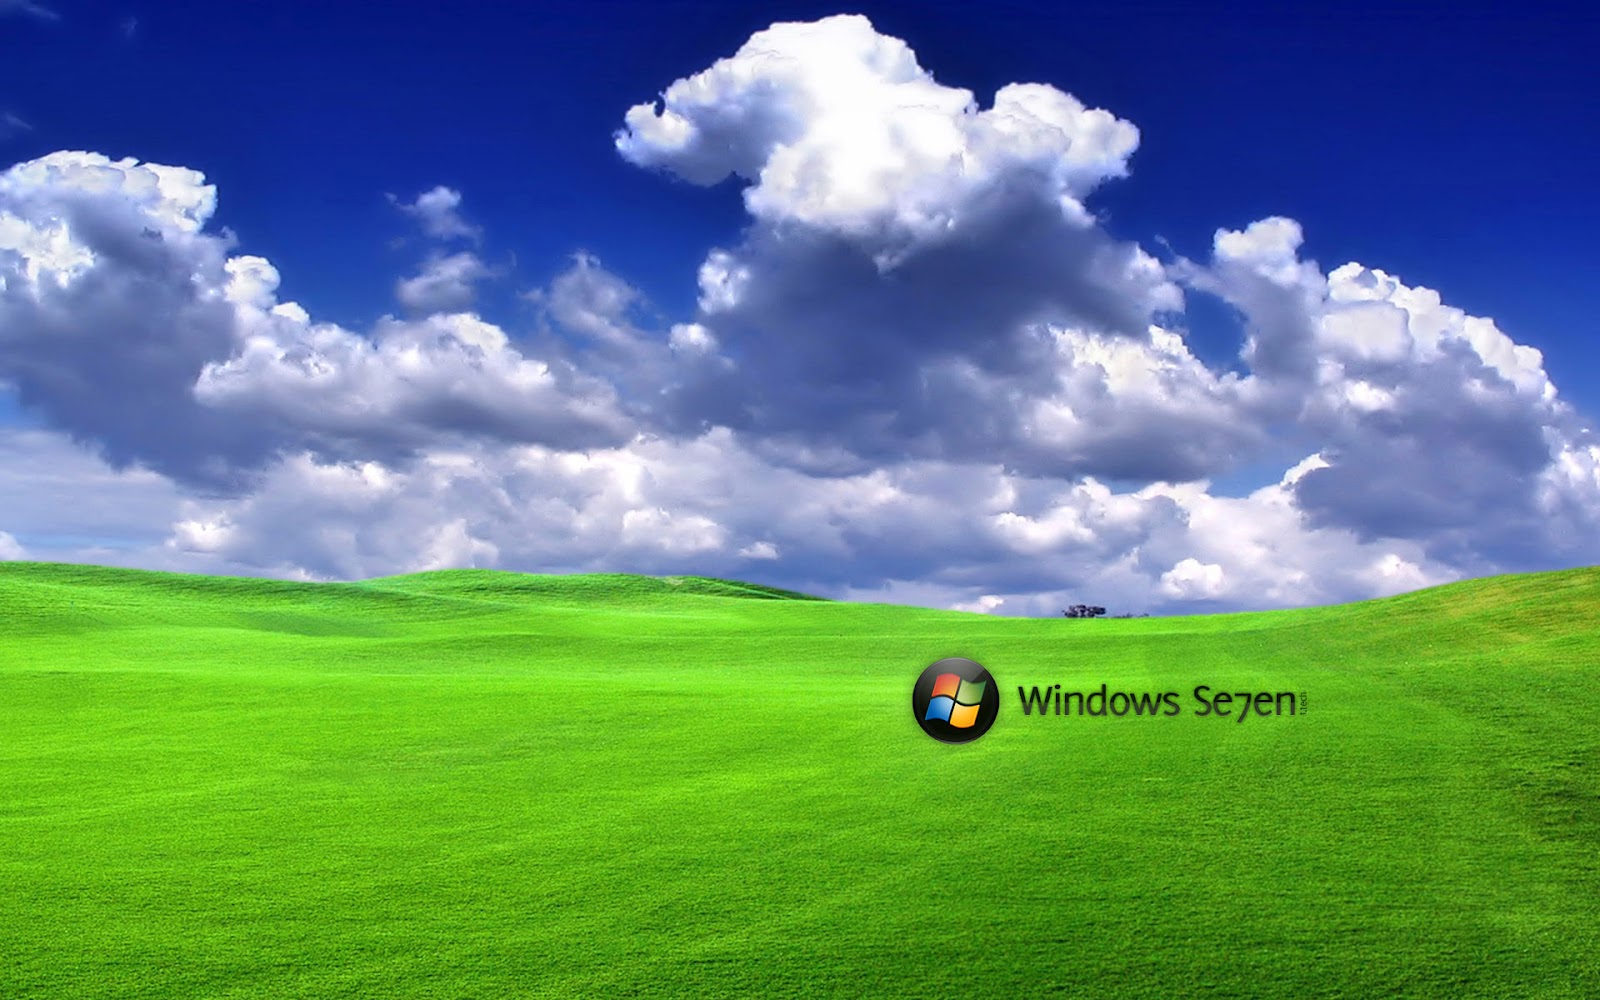 Natural HD Wallpaper: Windows 7 Wallpapers | Beautiful Backgrounds for